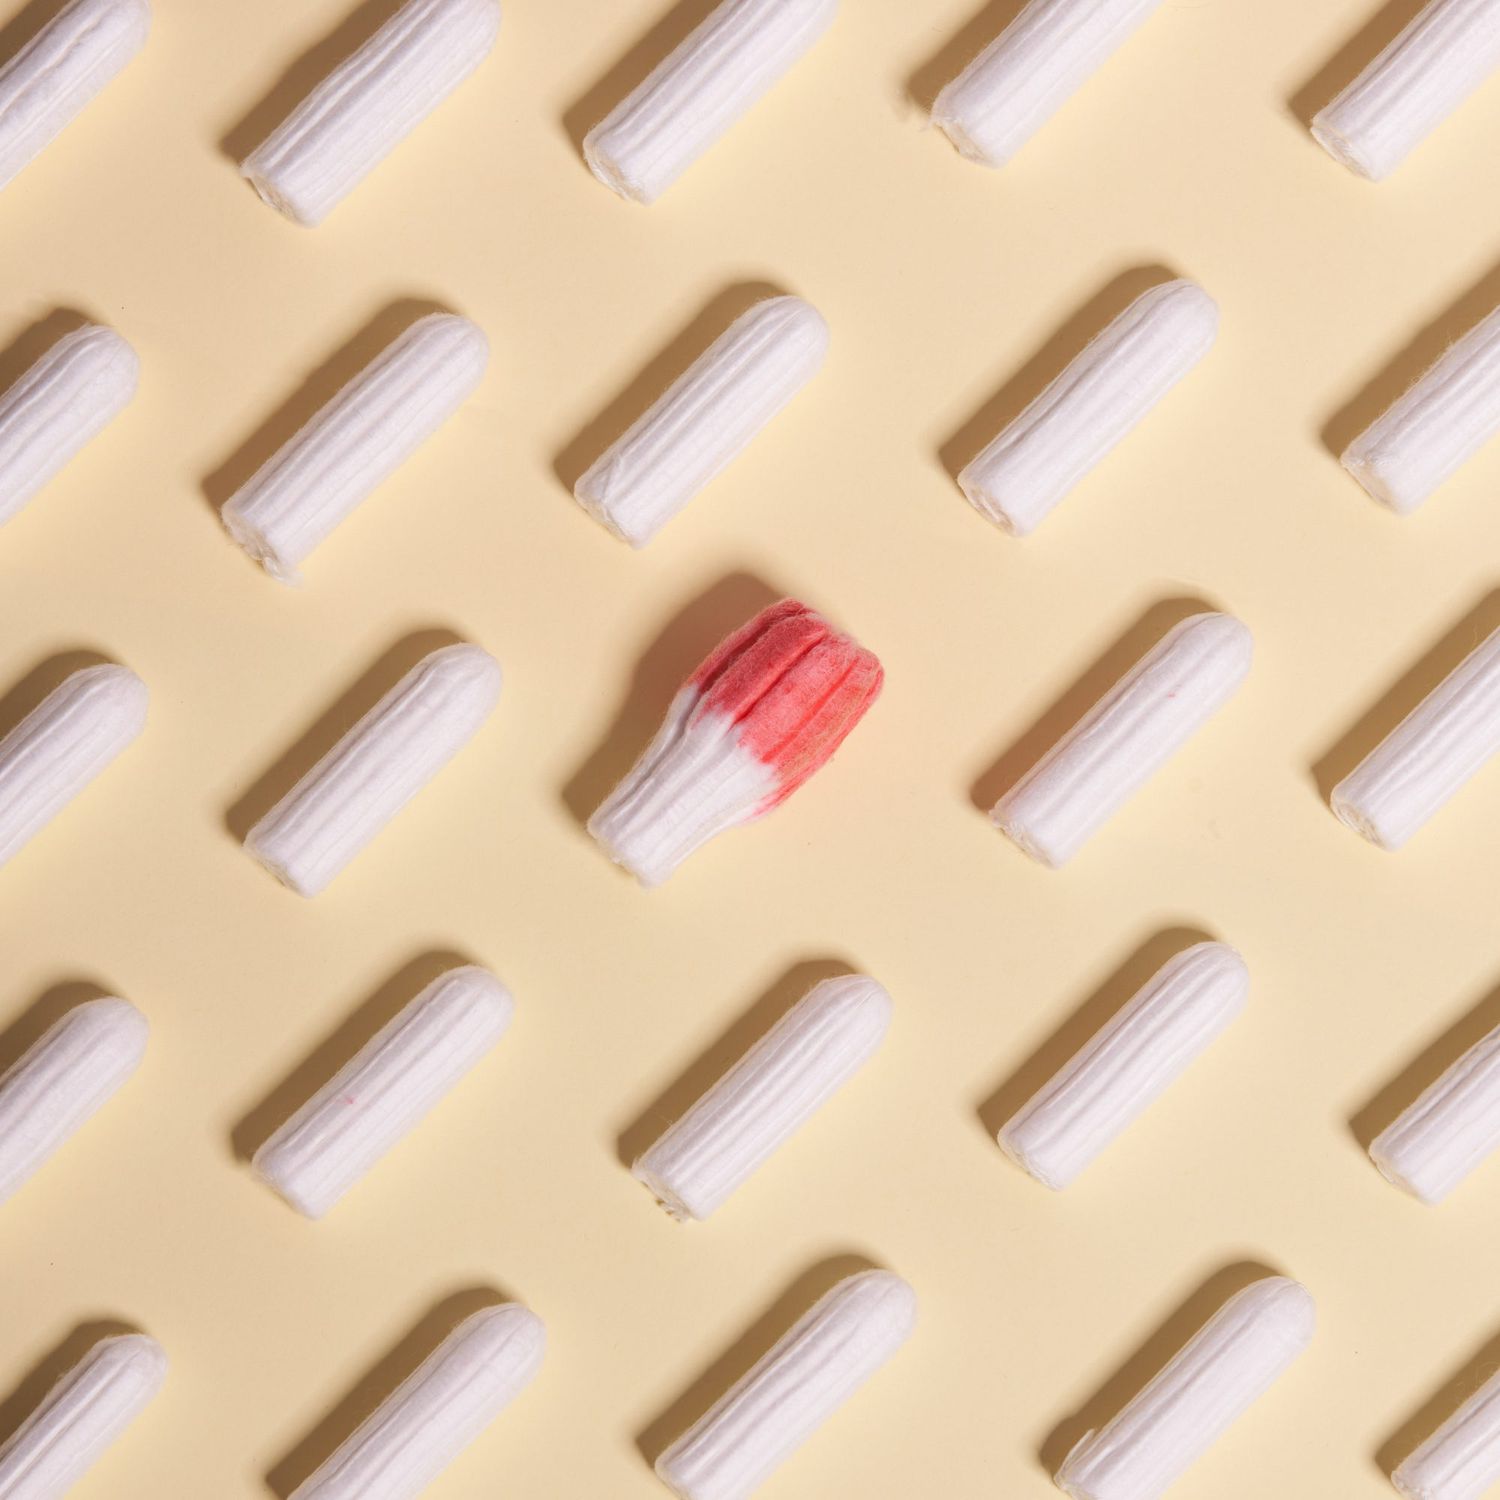 Directly Above Shot Of Tampons Against Beige Background as concept for menstrual cycle